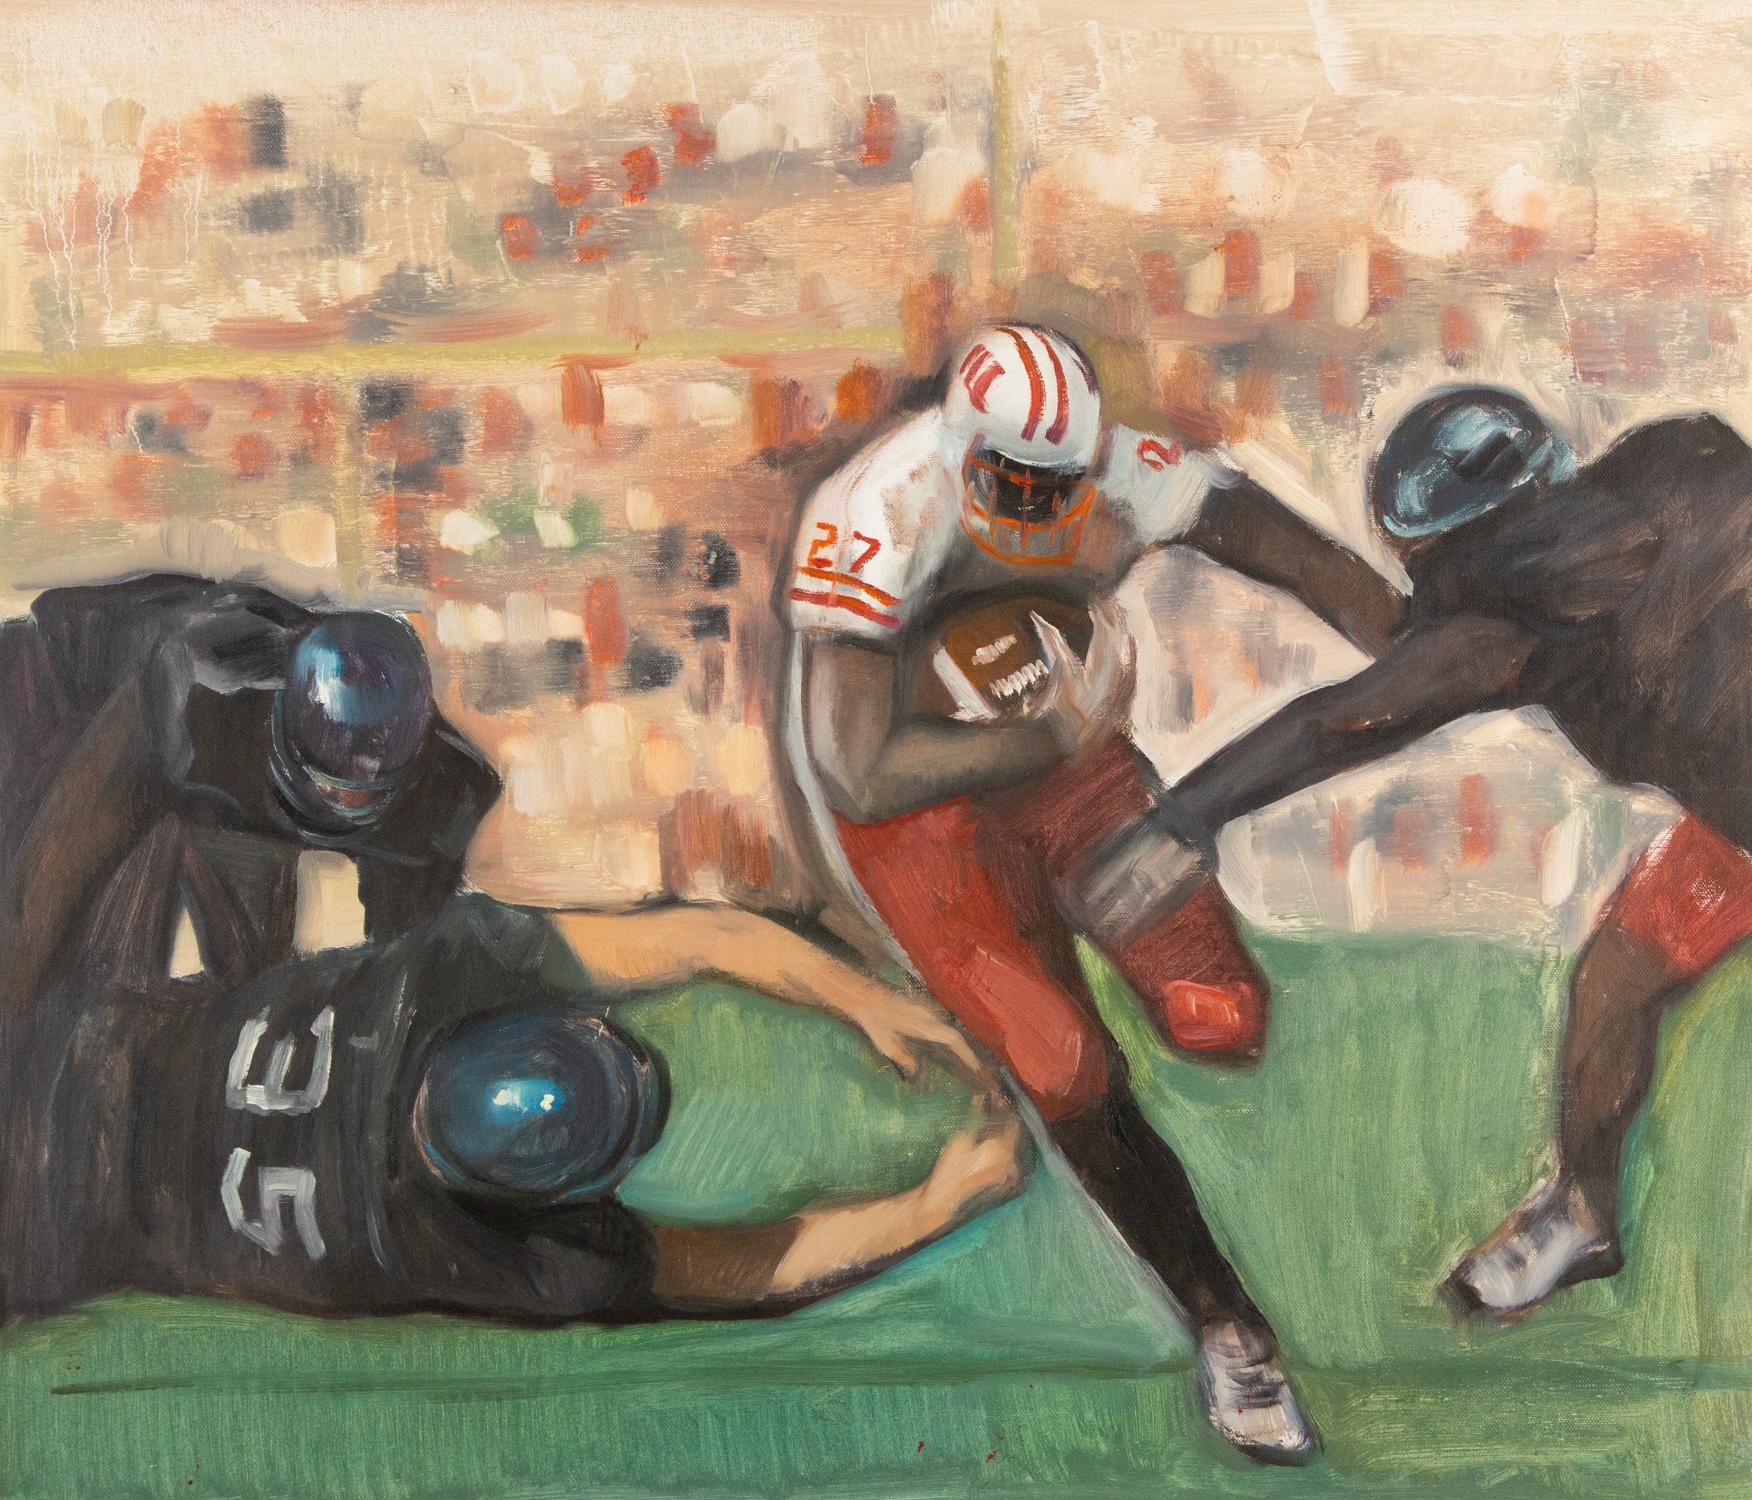 Title: Football Game
Medium: Oil on canvas
Size: 23 x 27 inches
Frame: Framing options available!
Condition: The painting appears to be in excellent condition.
Note: This painting is unstretched
Year: 2000 Circa
Artist: Huang Dongxing
Signature: